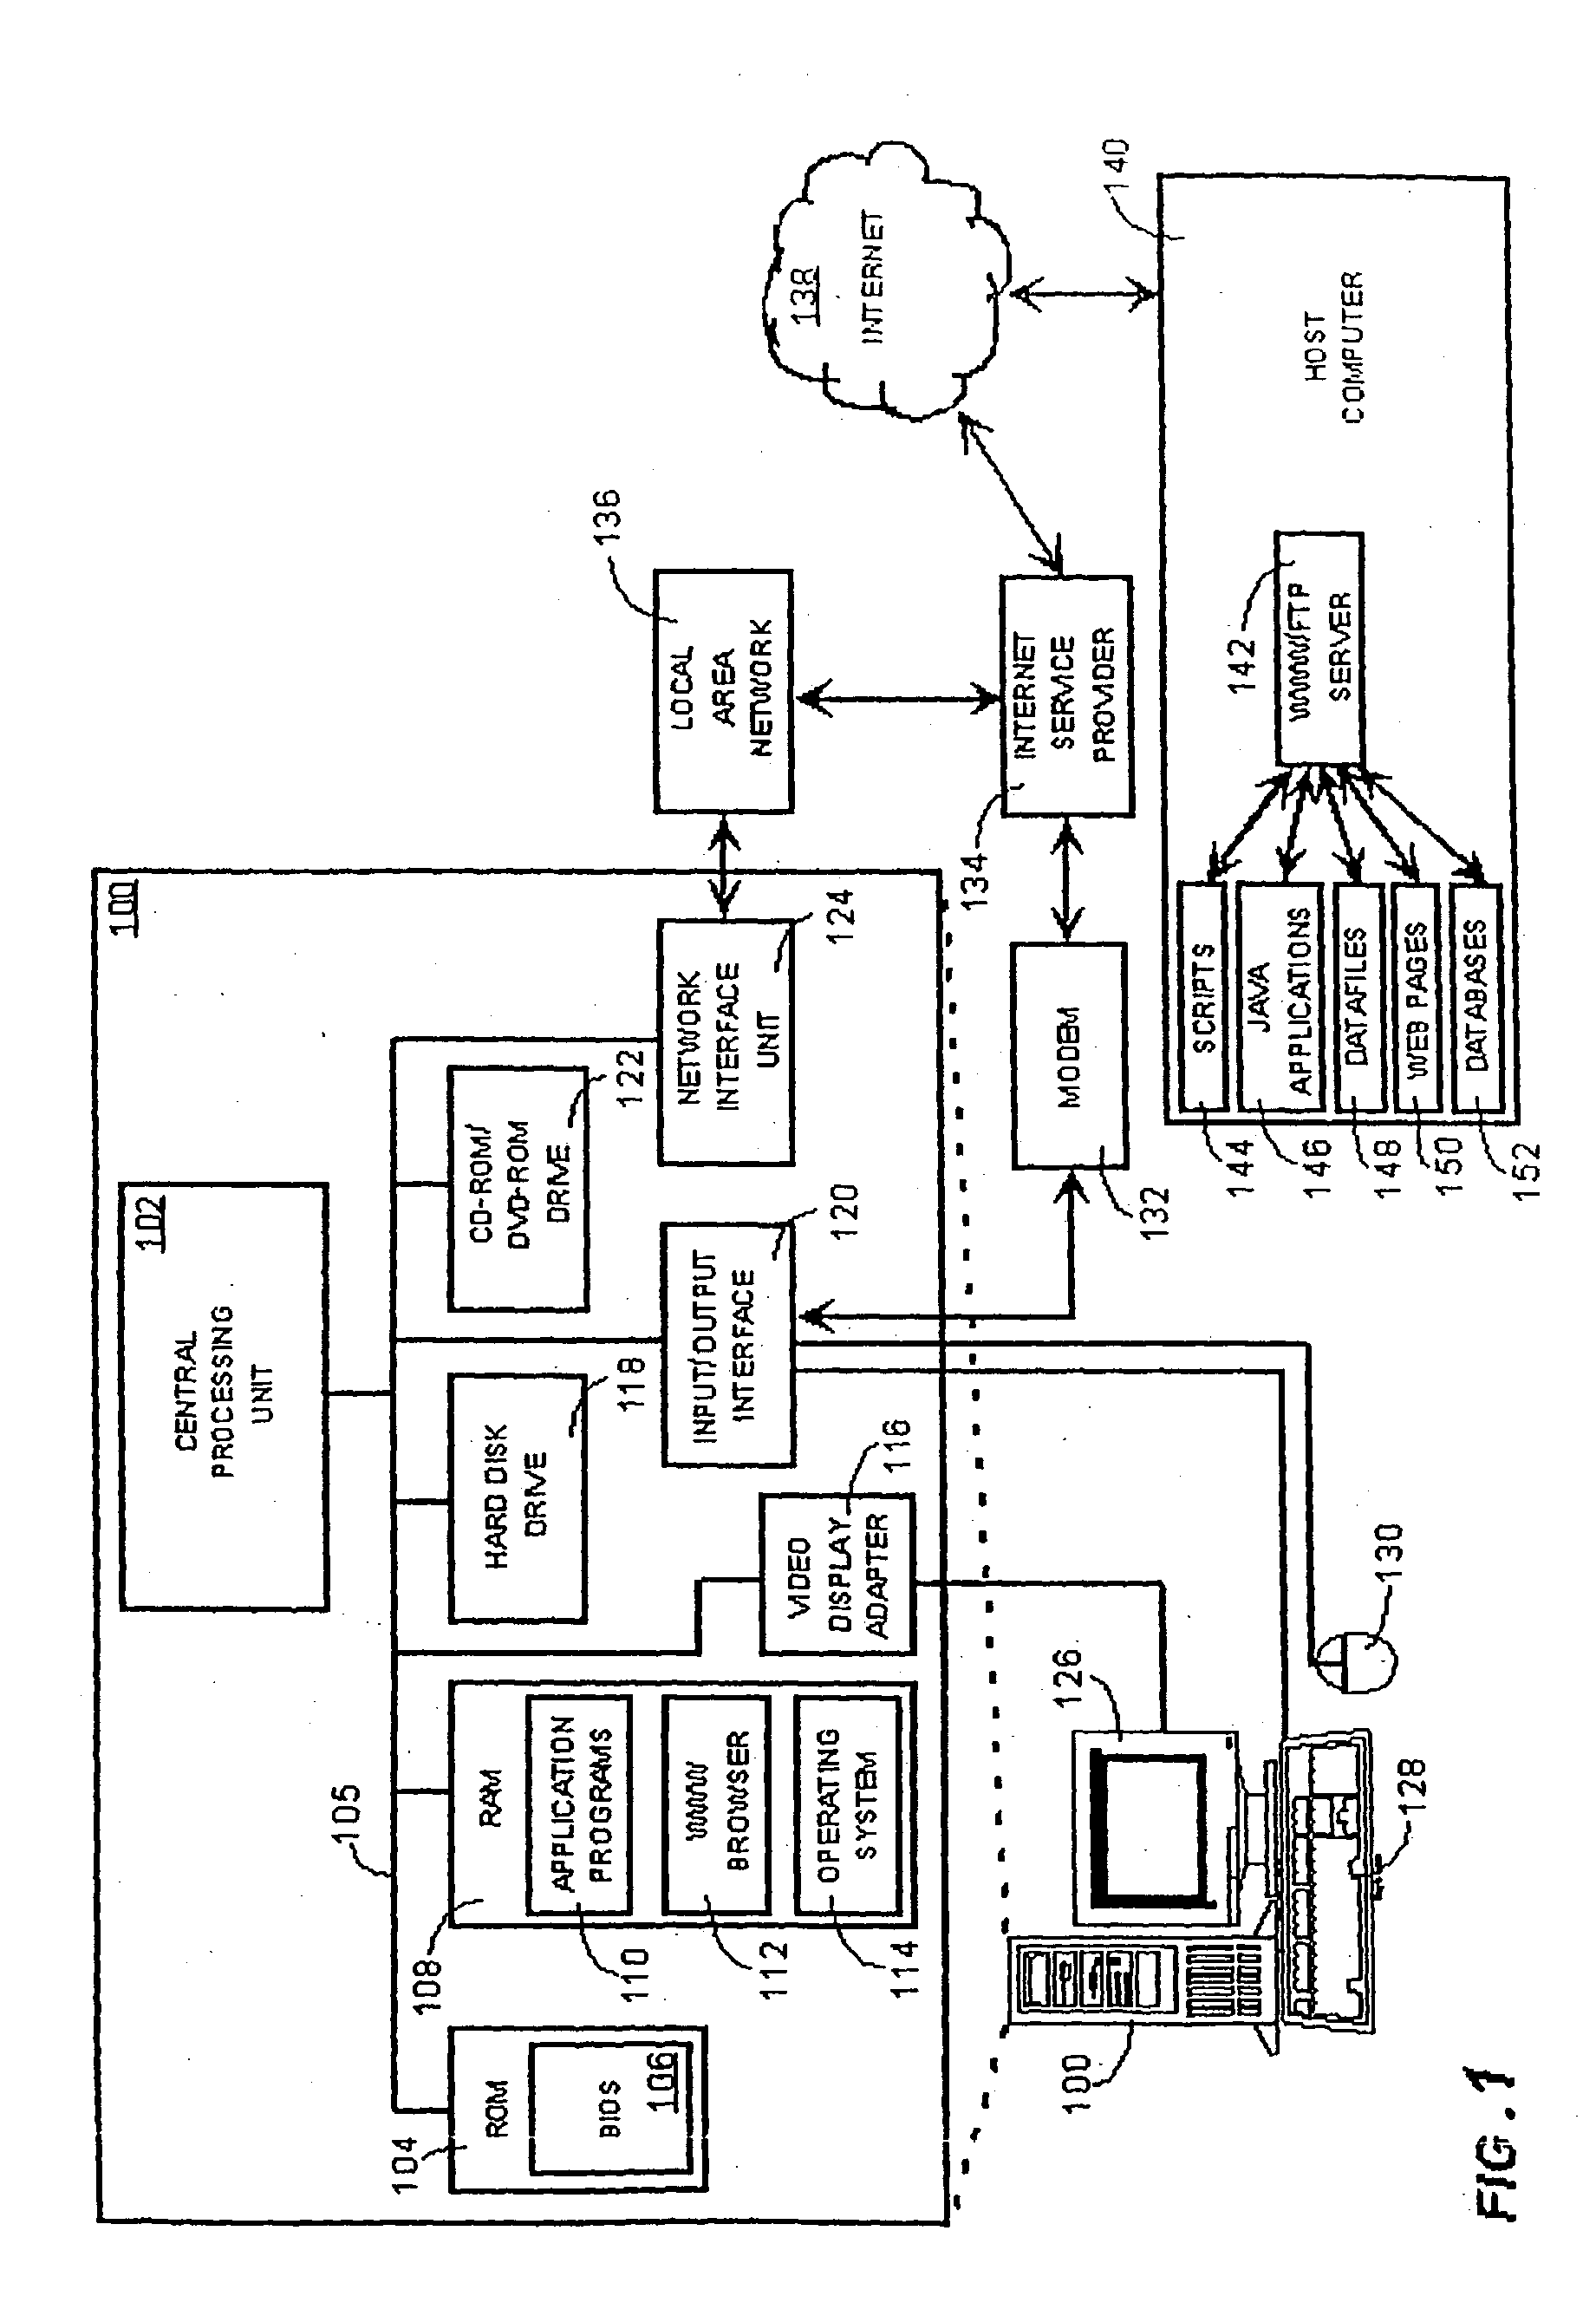 System and method for using interactive electronic representations of objects